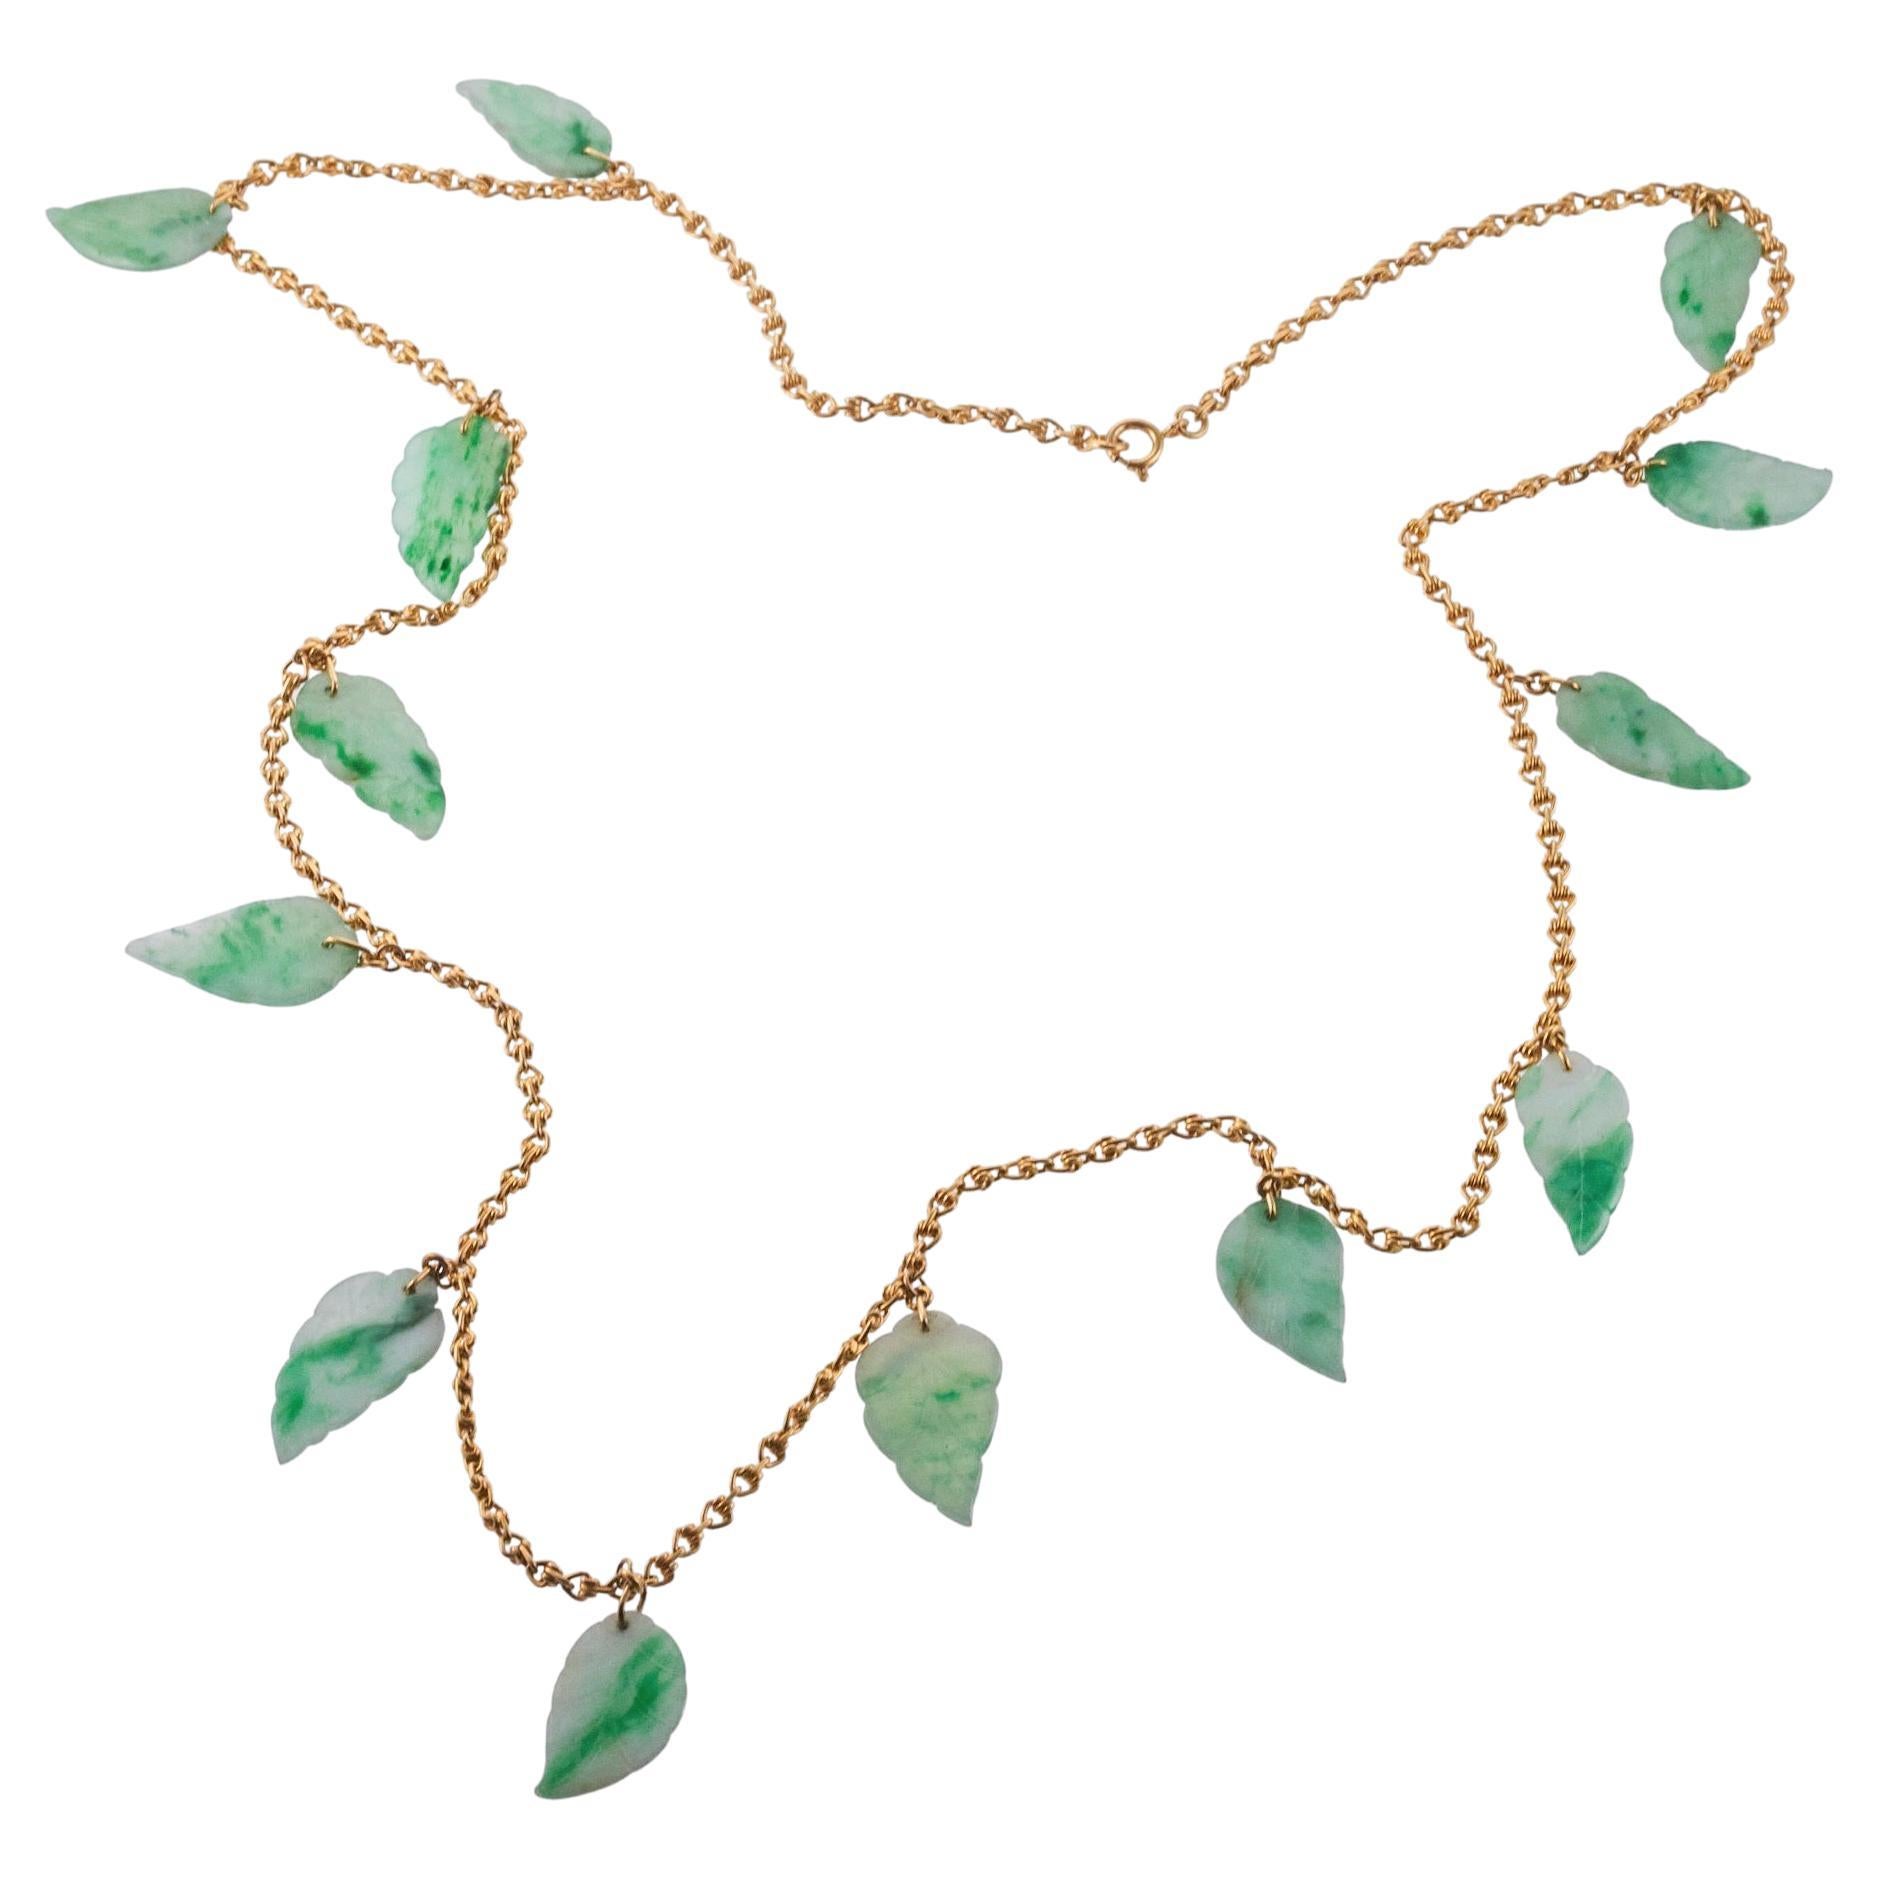 Long 18k gold chain necklace, with 13 carved leaves jade pendants, each measuring approx. 1